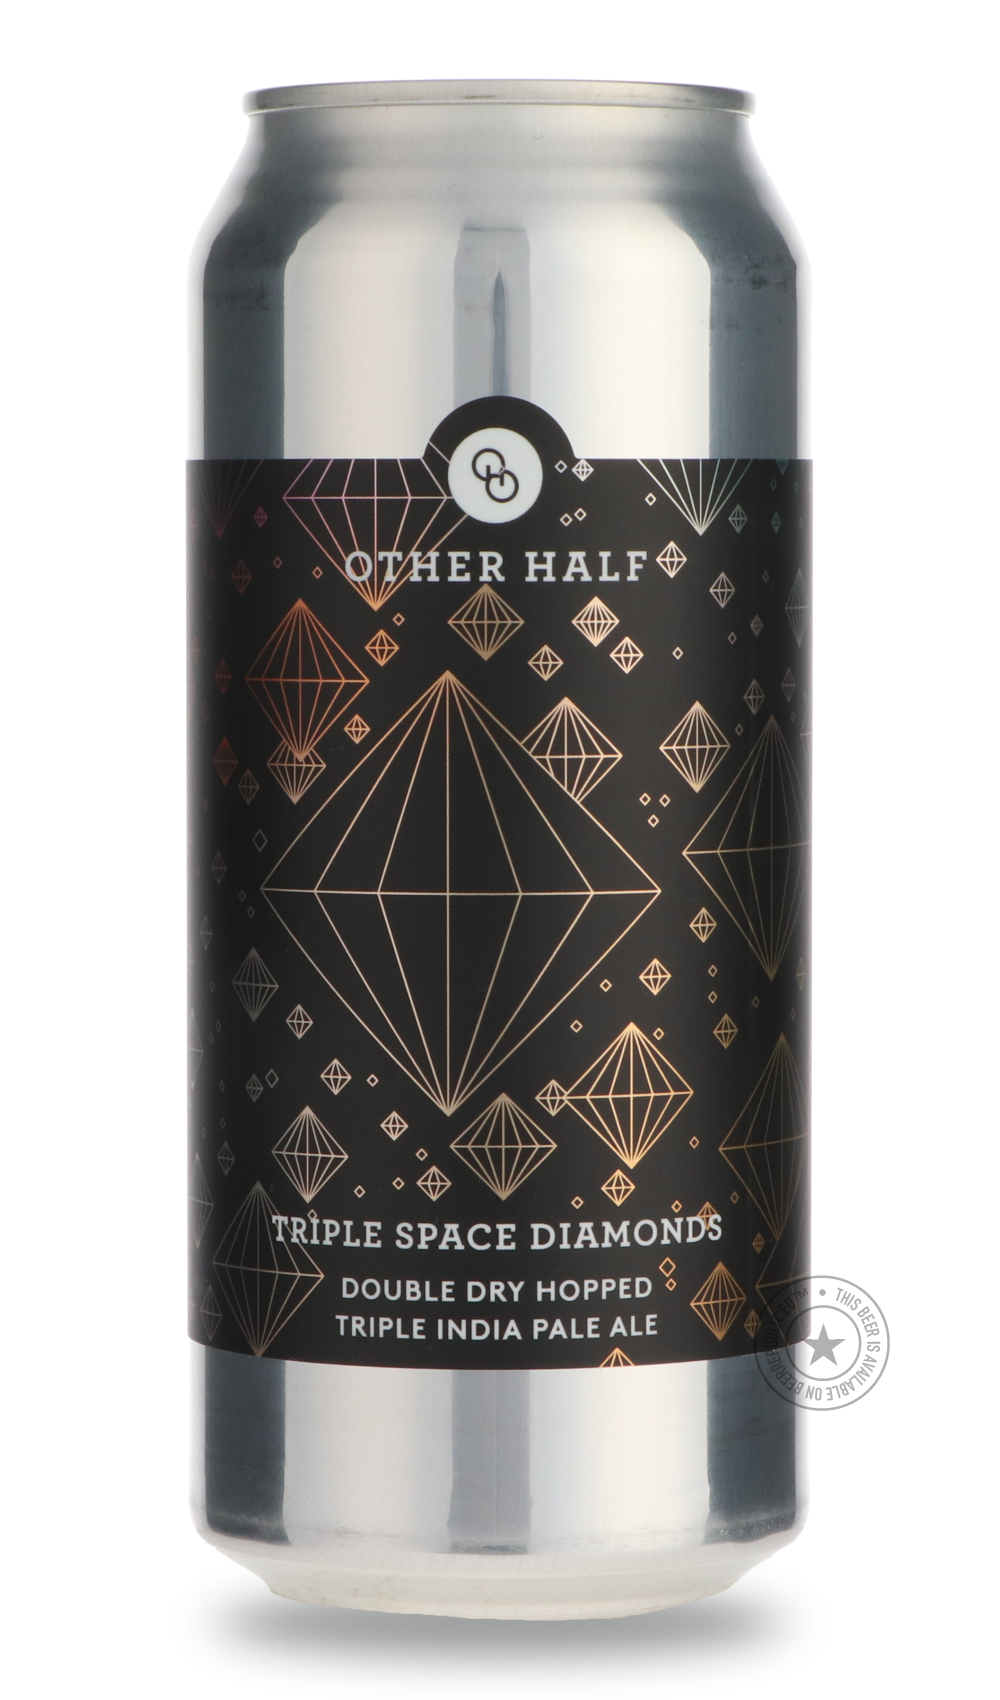 -Other Half- Triple Space Diamonds-IPA- Only @ Beer Republic - The best online beer store for American & Canadian craft beer - Buy beer online from the USA and Canada - Bier online kopen - Amerikaans bier kopen - Craft beer store - Craft beer kopen - Amerikanisch bier kaufen - Bier online kaufen - Acheter biere online - IPA - Stout - Porter - New England IPA - Hazy IPA - Imperial Stout - Barrel Aged - Barrel Aged Imperial Stout - Brown - Dark beer - Blond - Blonde - Pilsner - Lager - Wheat - Weizen - Amber 